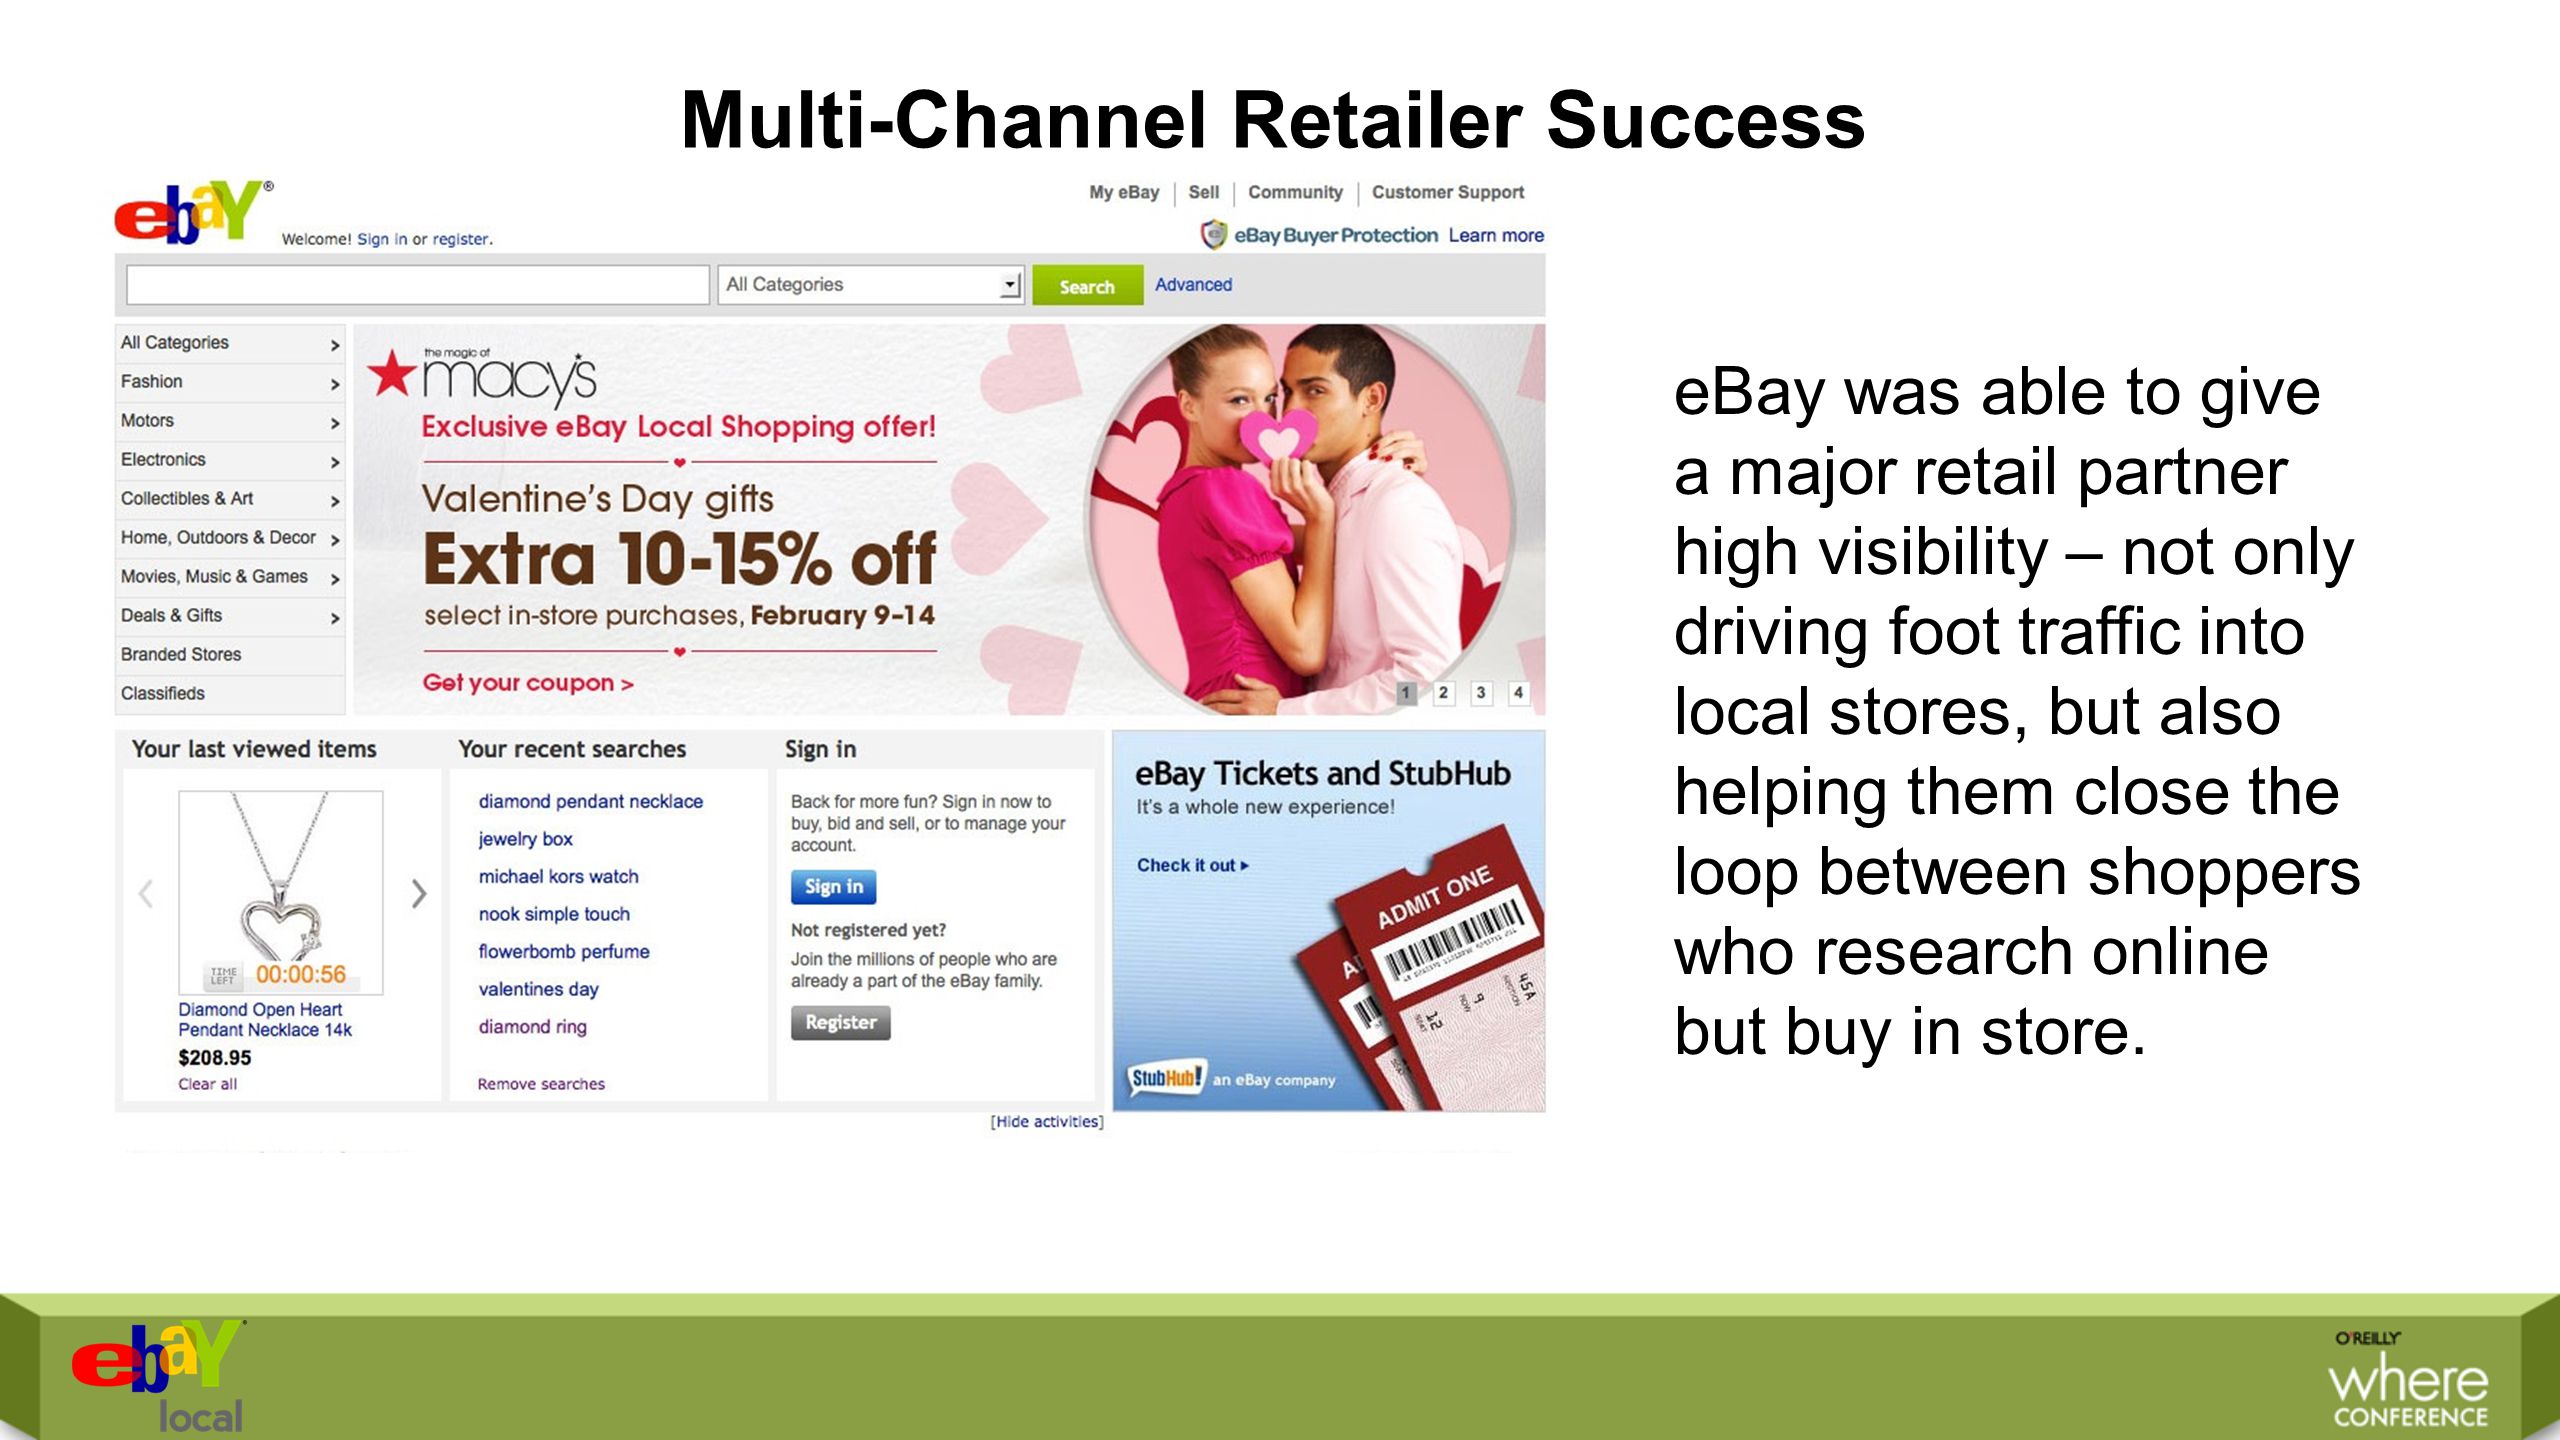 Multi-Channel Retailer Success eBay was able to give a major retail partner high visibility – not only driving foot traffic into local stores, but also helping them close the loop between shoppers who research online but buy in store.